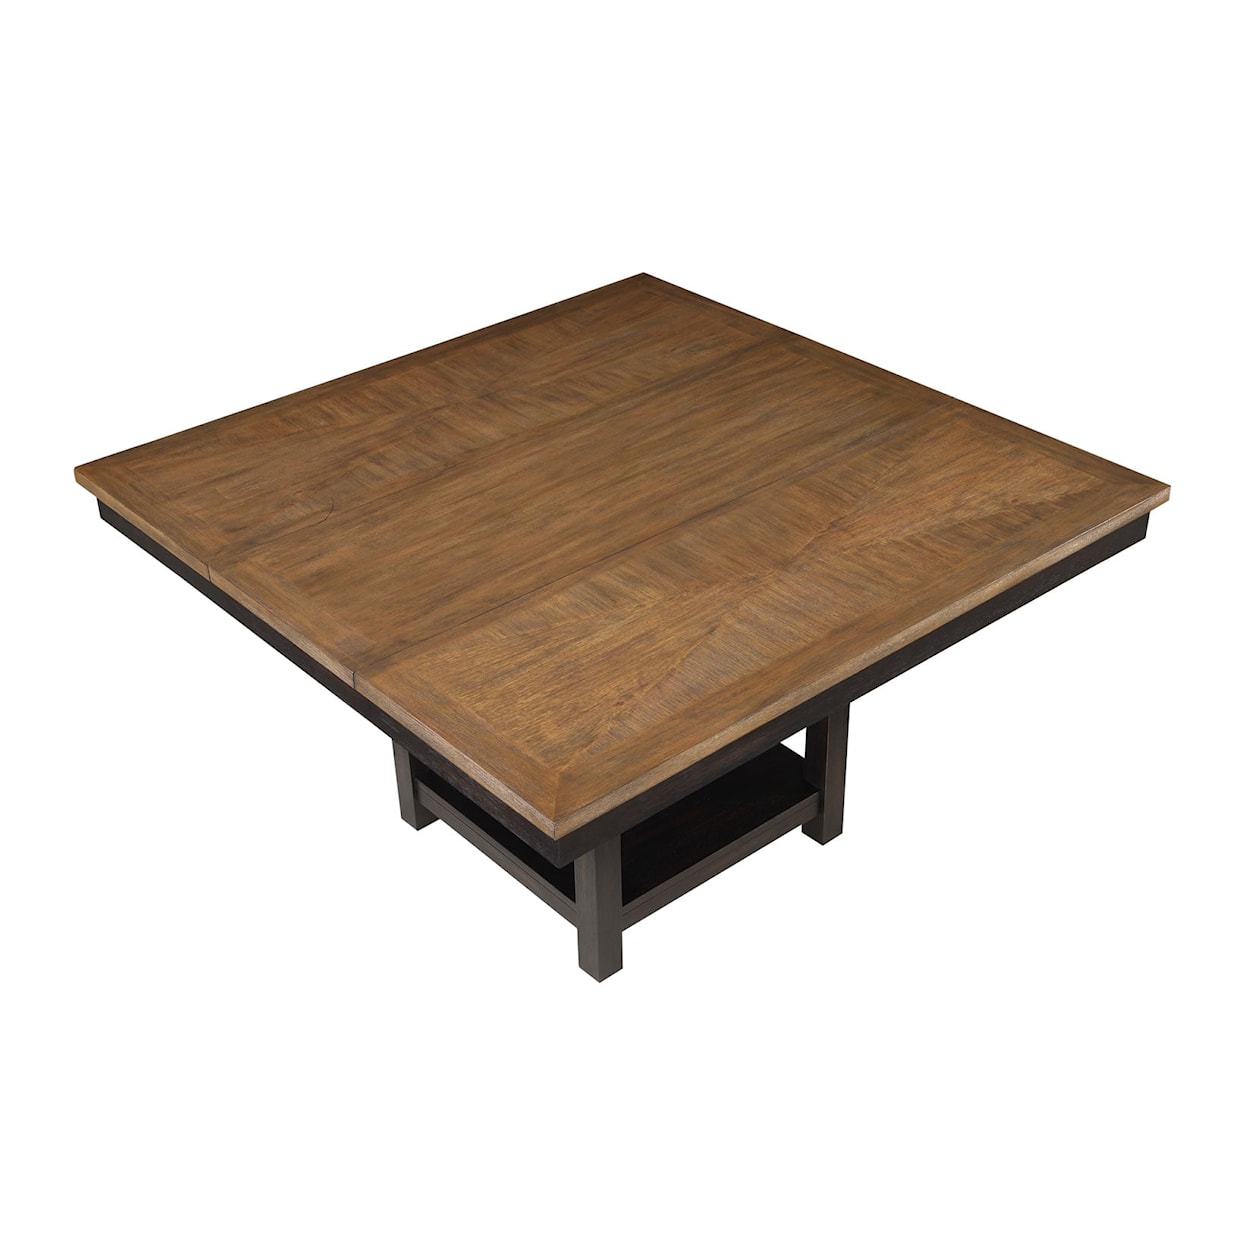 Prime Harington Dining Table with 16-Inch Table Leaf